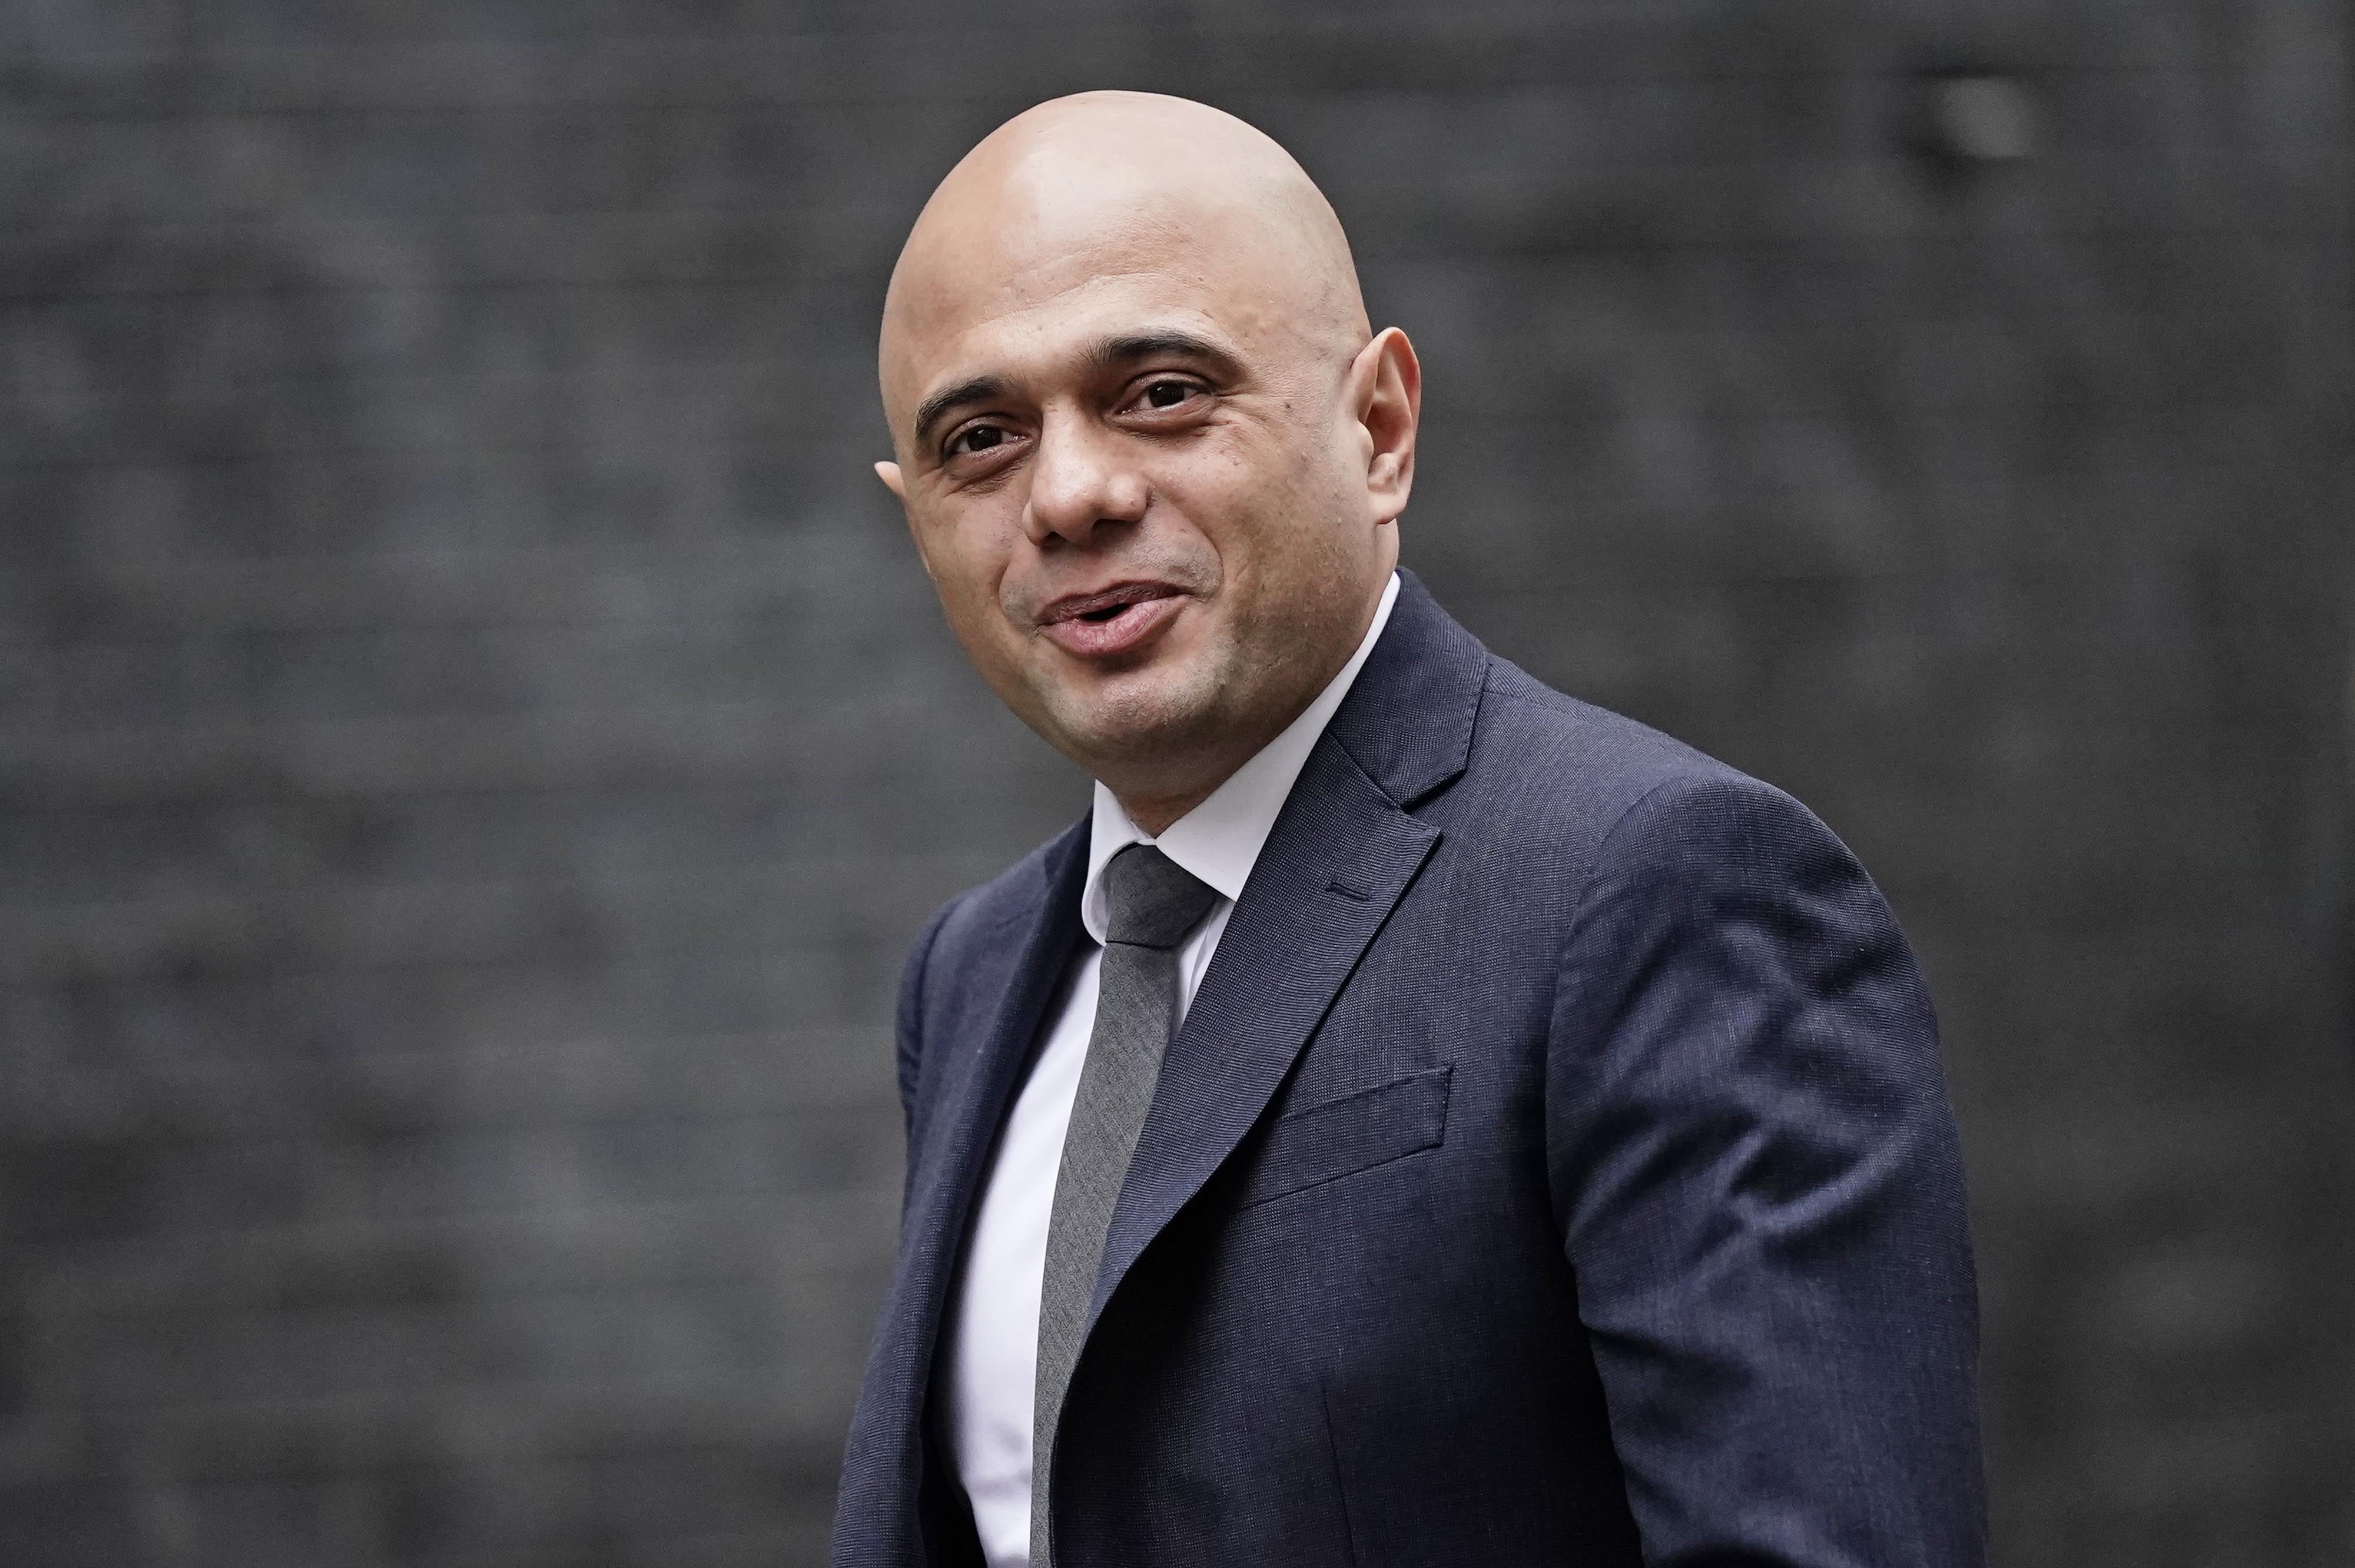 Former Treasury minister and derivatives trader Sajid Javid, now health secretary, pressured the FCA to exclude victims from a redress scheme